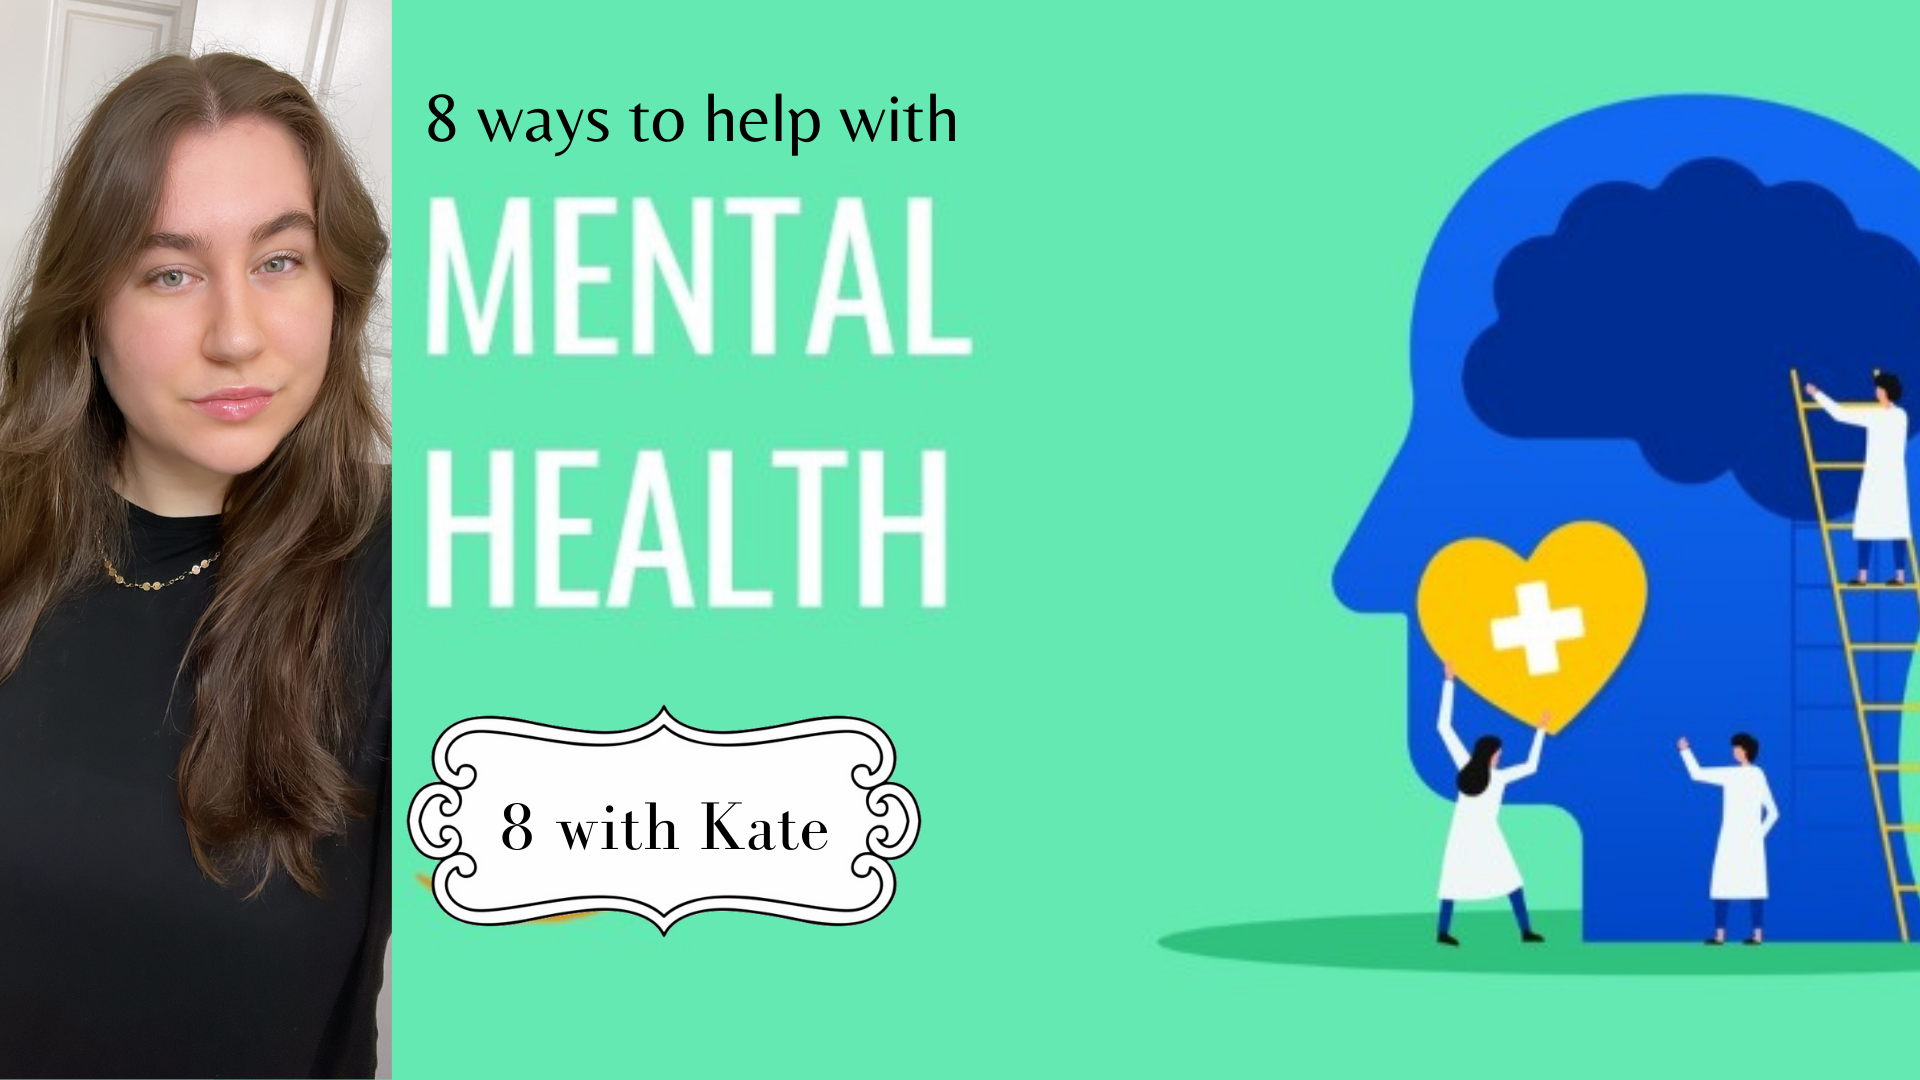 8 with Kate: 8 Tips on how to help mental health (for yourself and others)